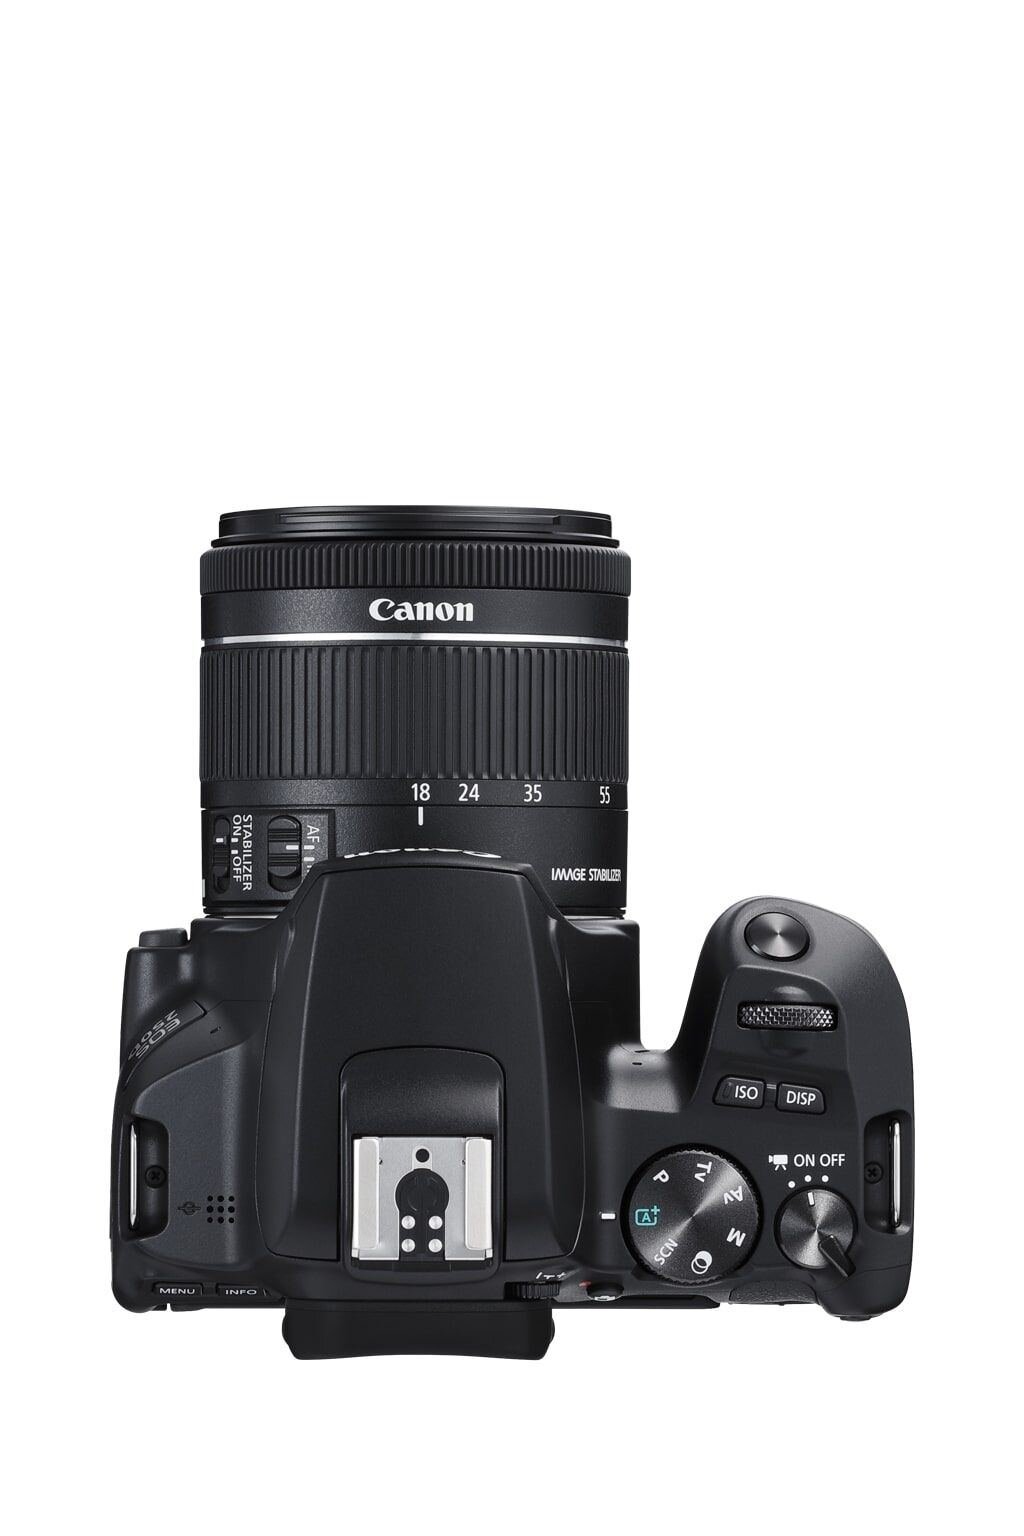 Canon EOS 250D inkl. EF-S 18-55mm 1:4-5,6 IS STM und EF 50mm 1:1,8 STM